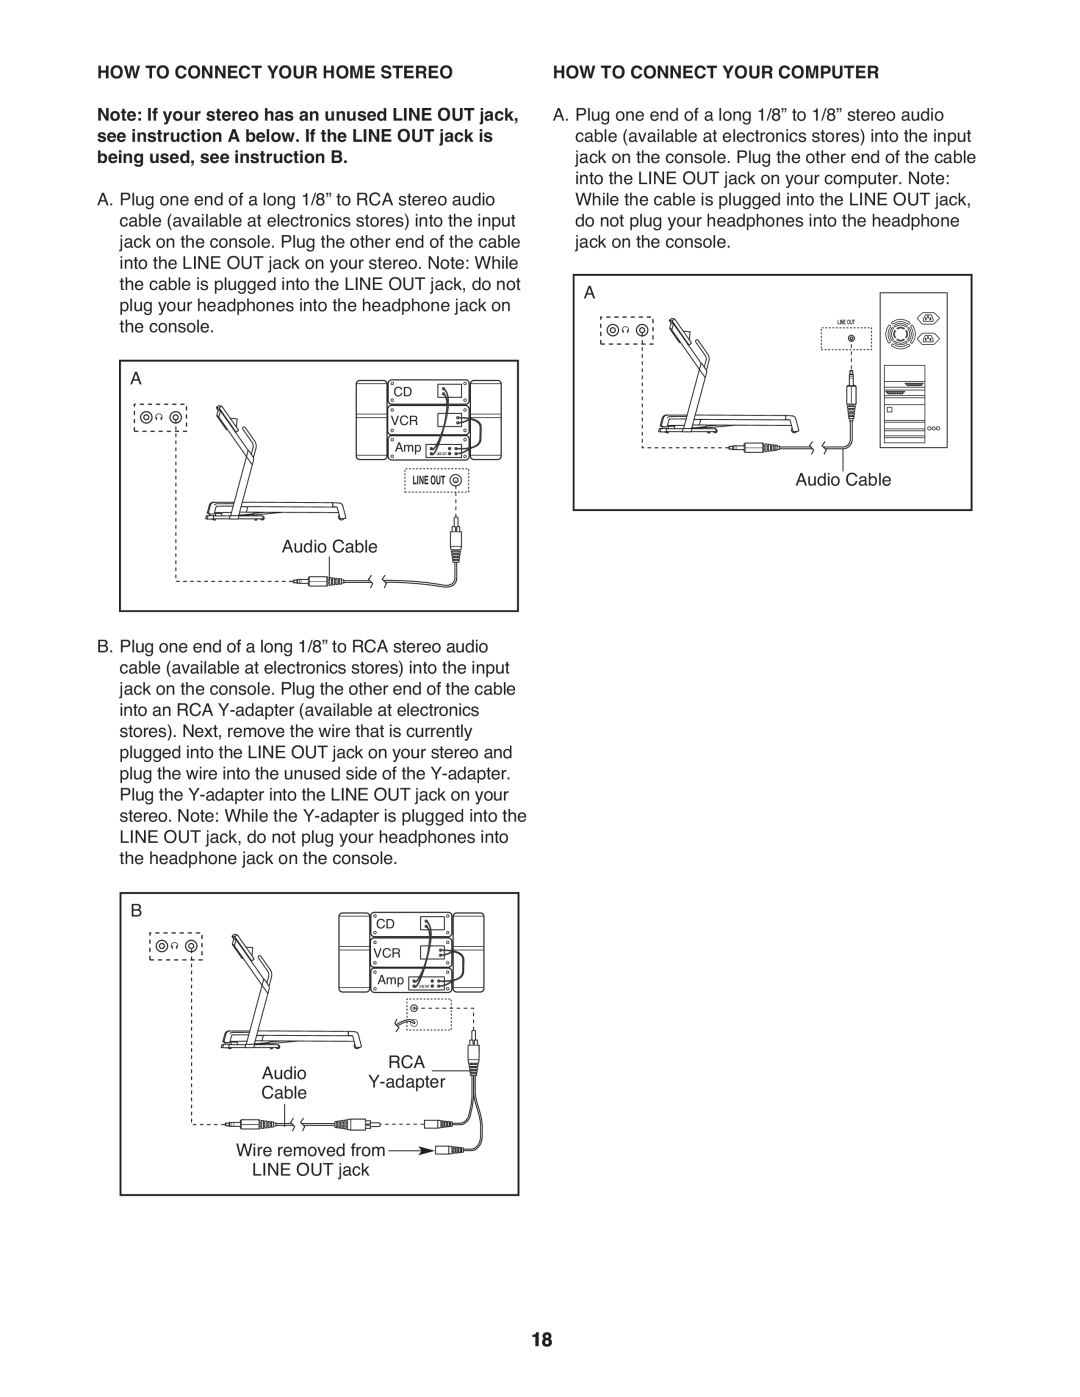 ProForm PMTL49305.0 user manual How To Connect Your Home Stereo, How To Connect Your Computer, Line Out 